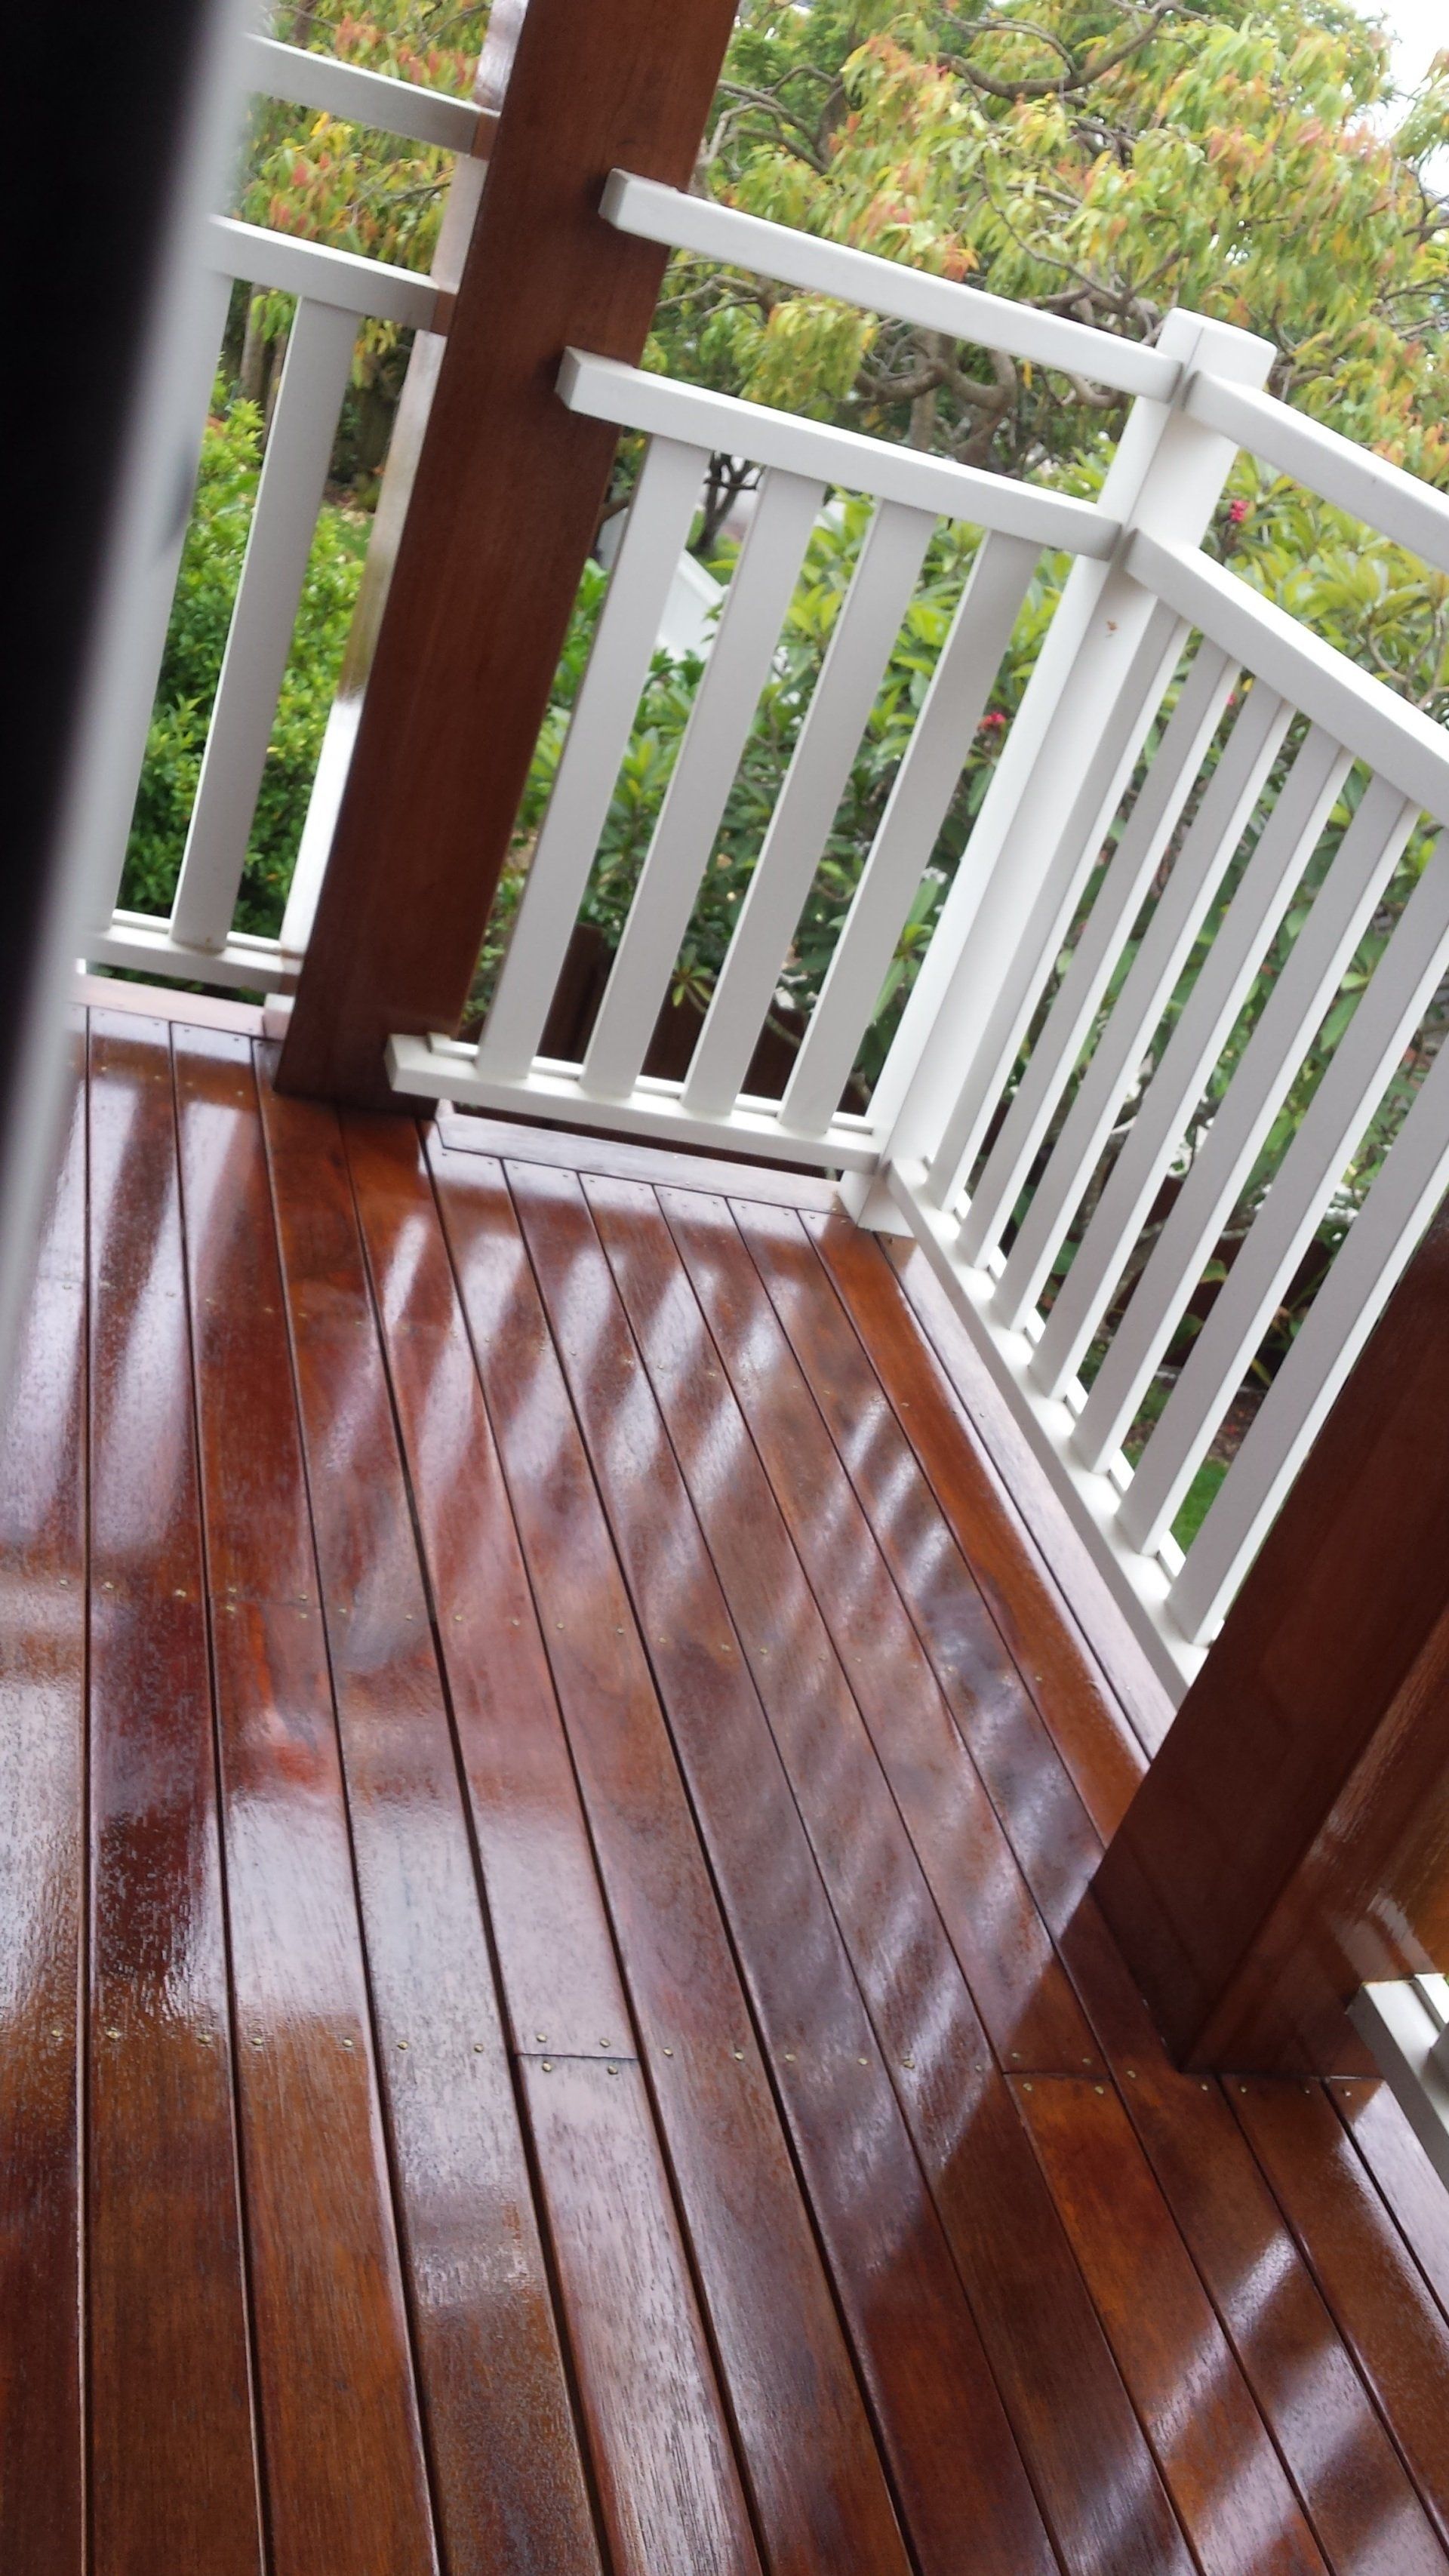 Exterior decking— NGD Painting in Park Avenue, QLD